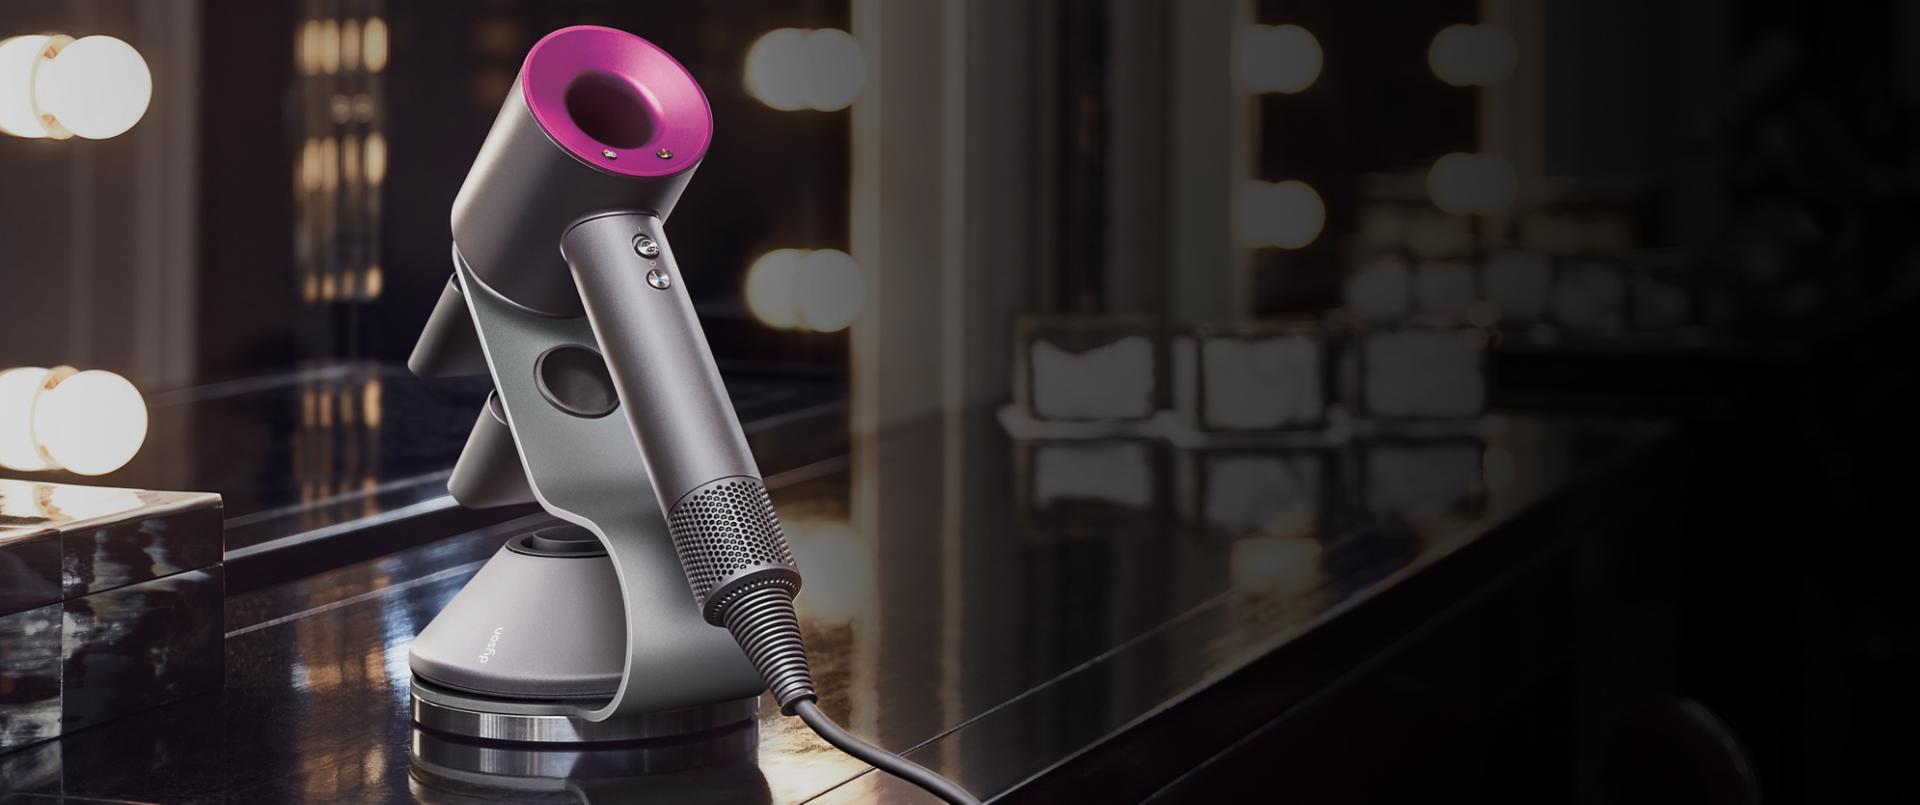 Dyson Supersonic hair dryer on hotel stand